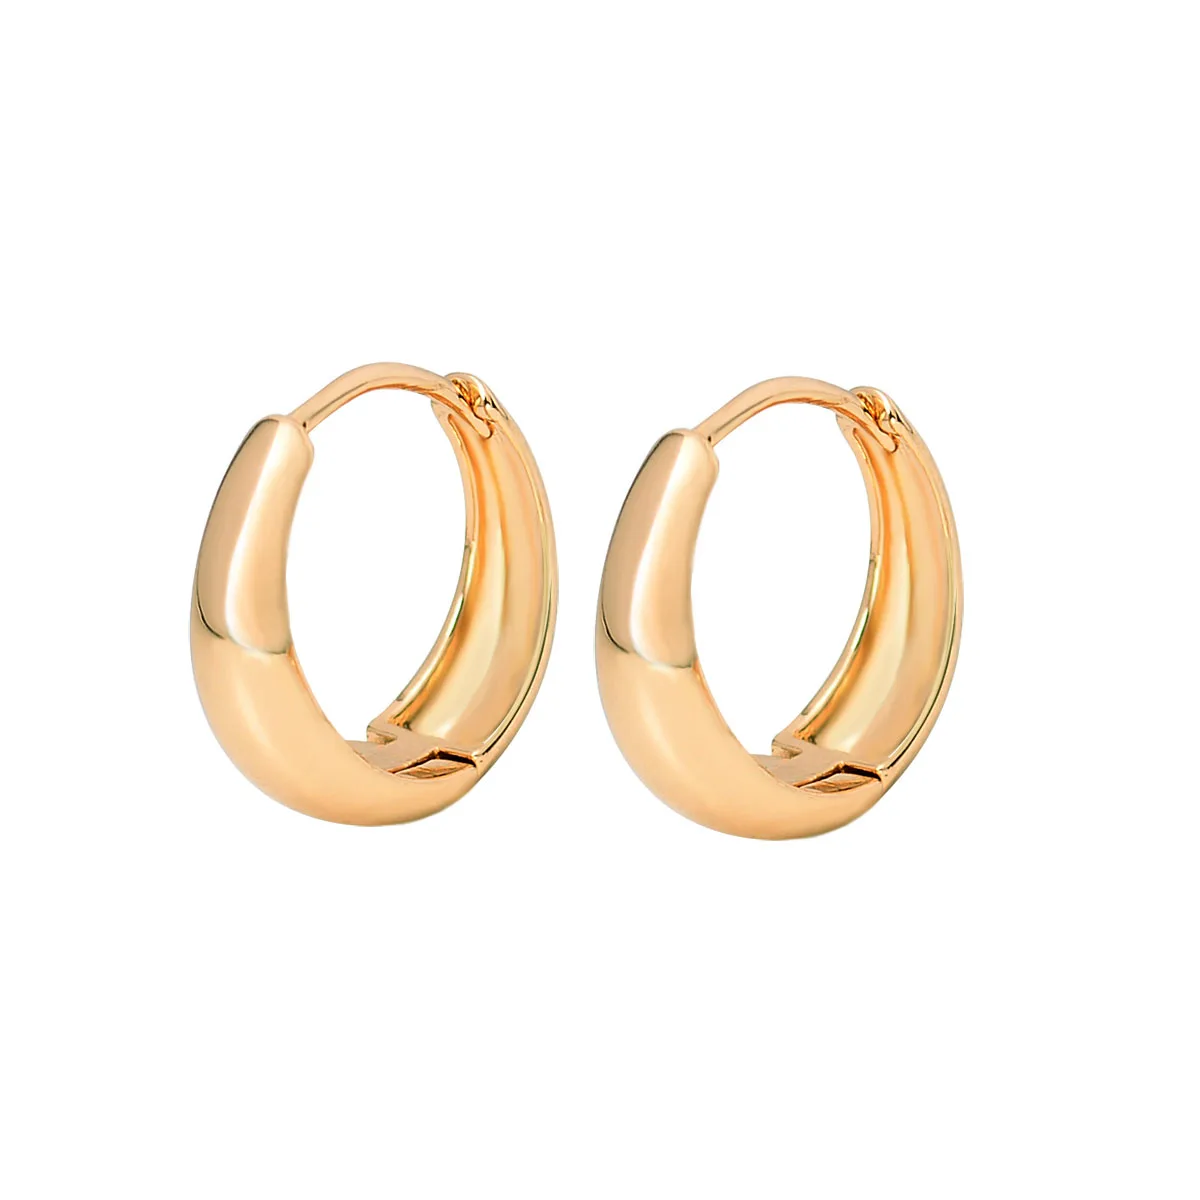 Top Quality High Polish Smooth Rose Gold Color Hoop Huggie Earrings Oval Chunky Jewelry Small Circle